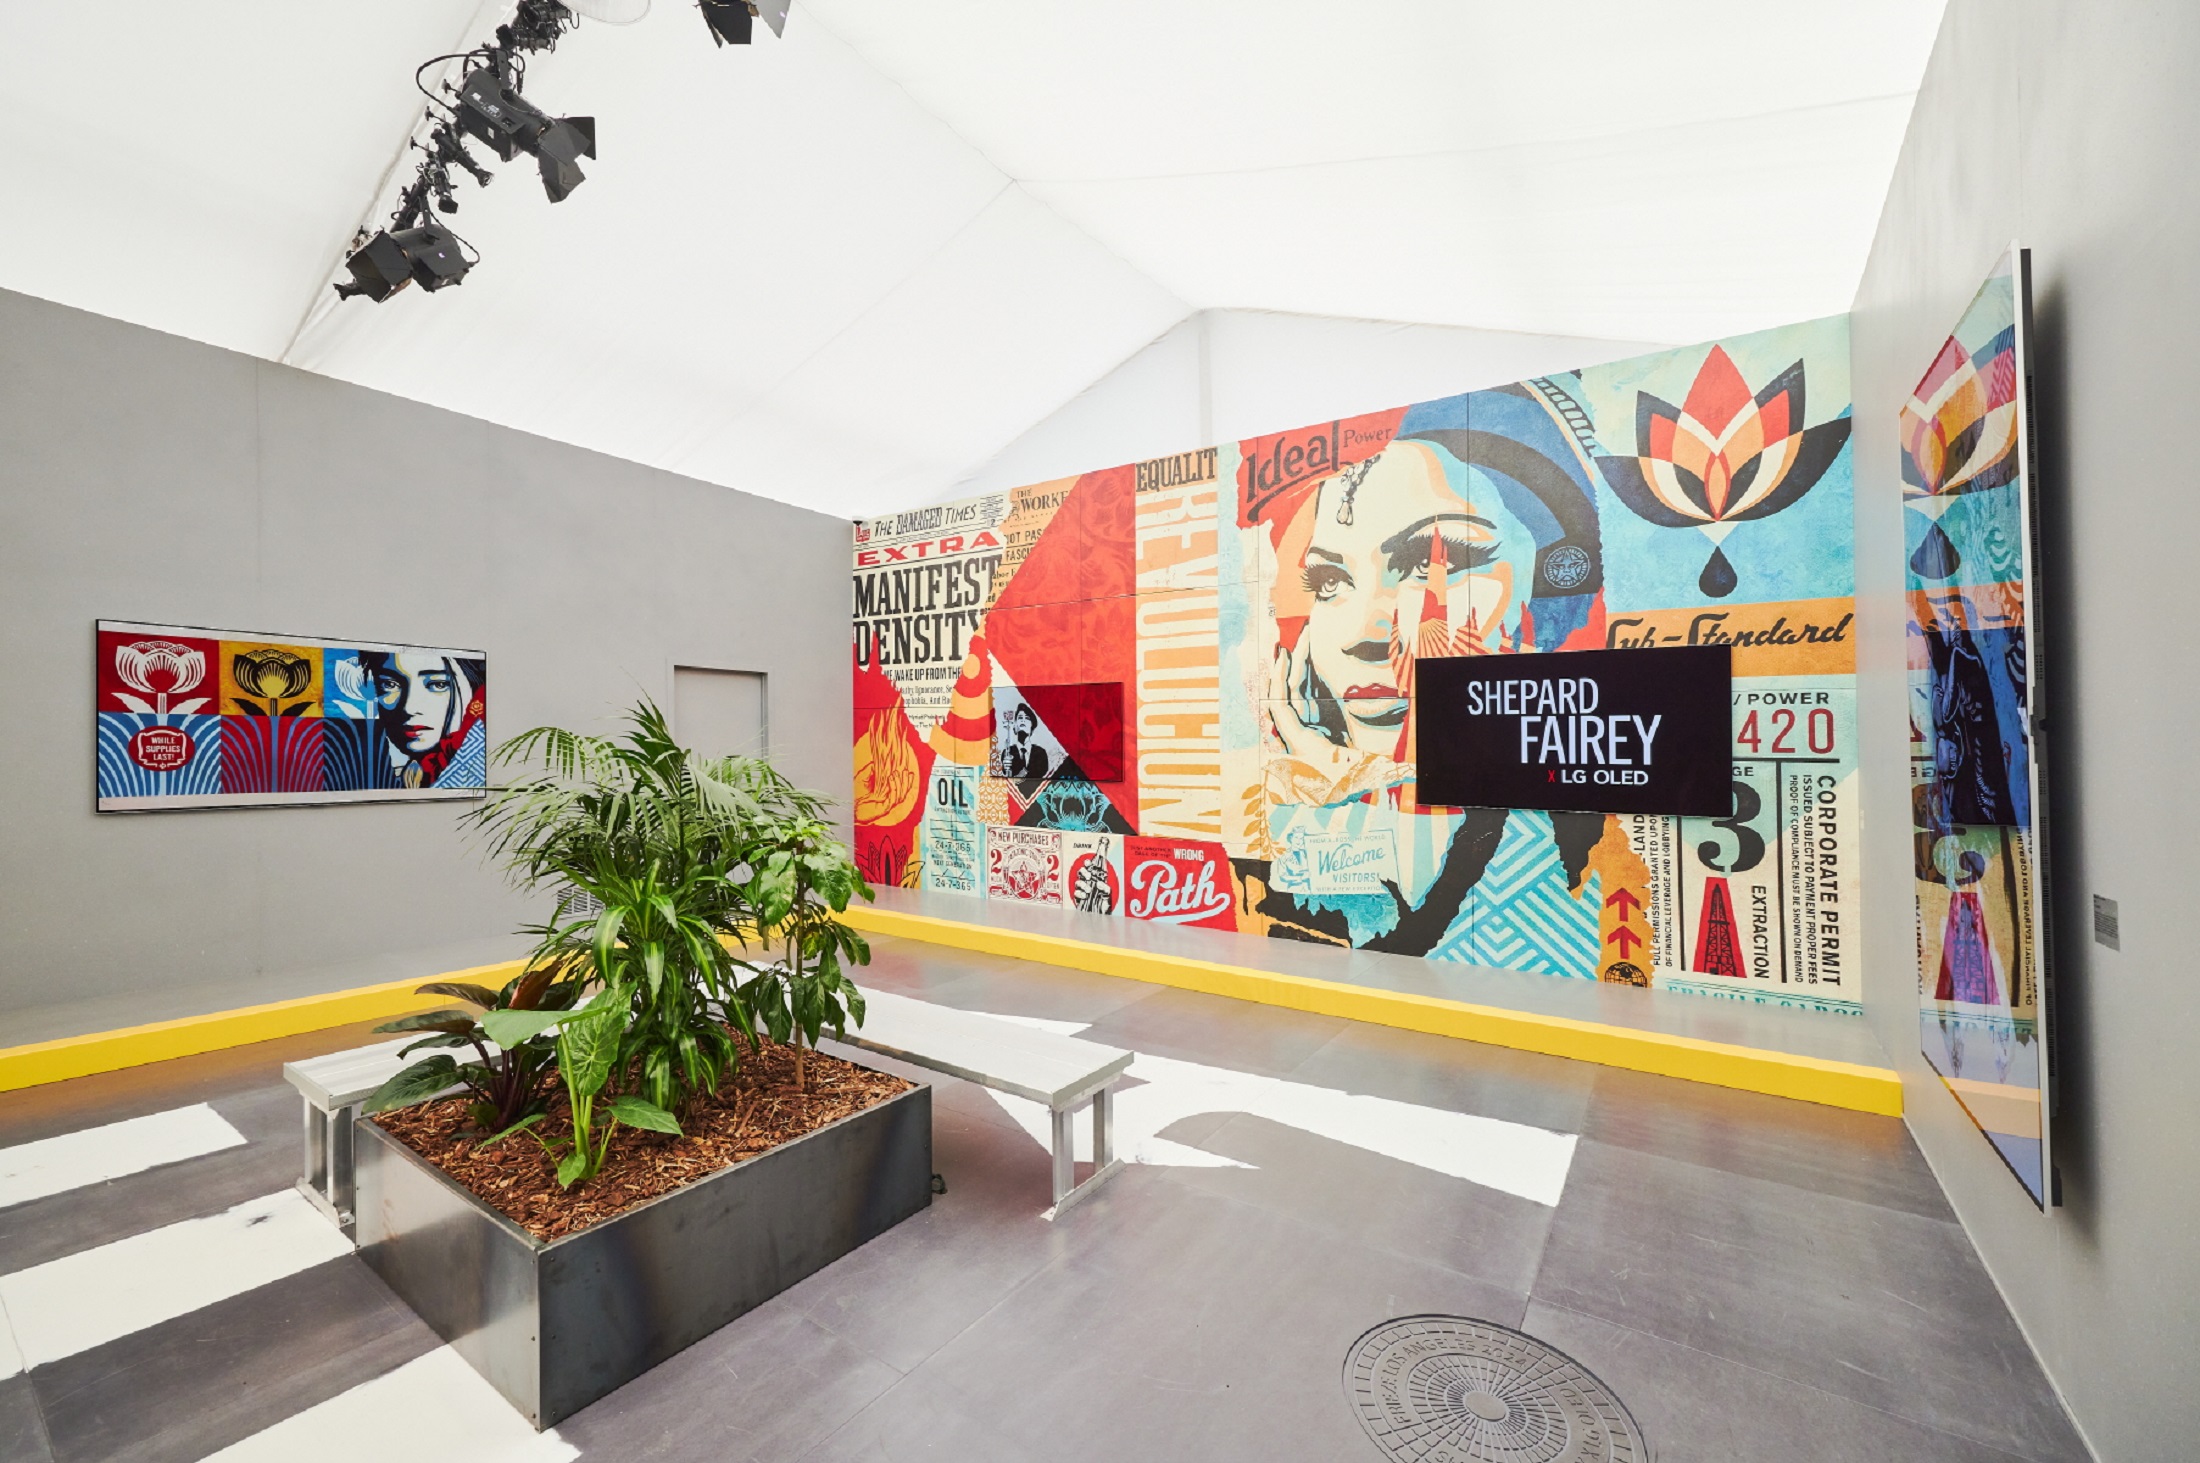 Lg Oled Collaborates With Shepard Fairey To Bring Street Art Into The Digital Realm